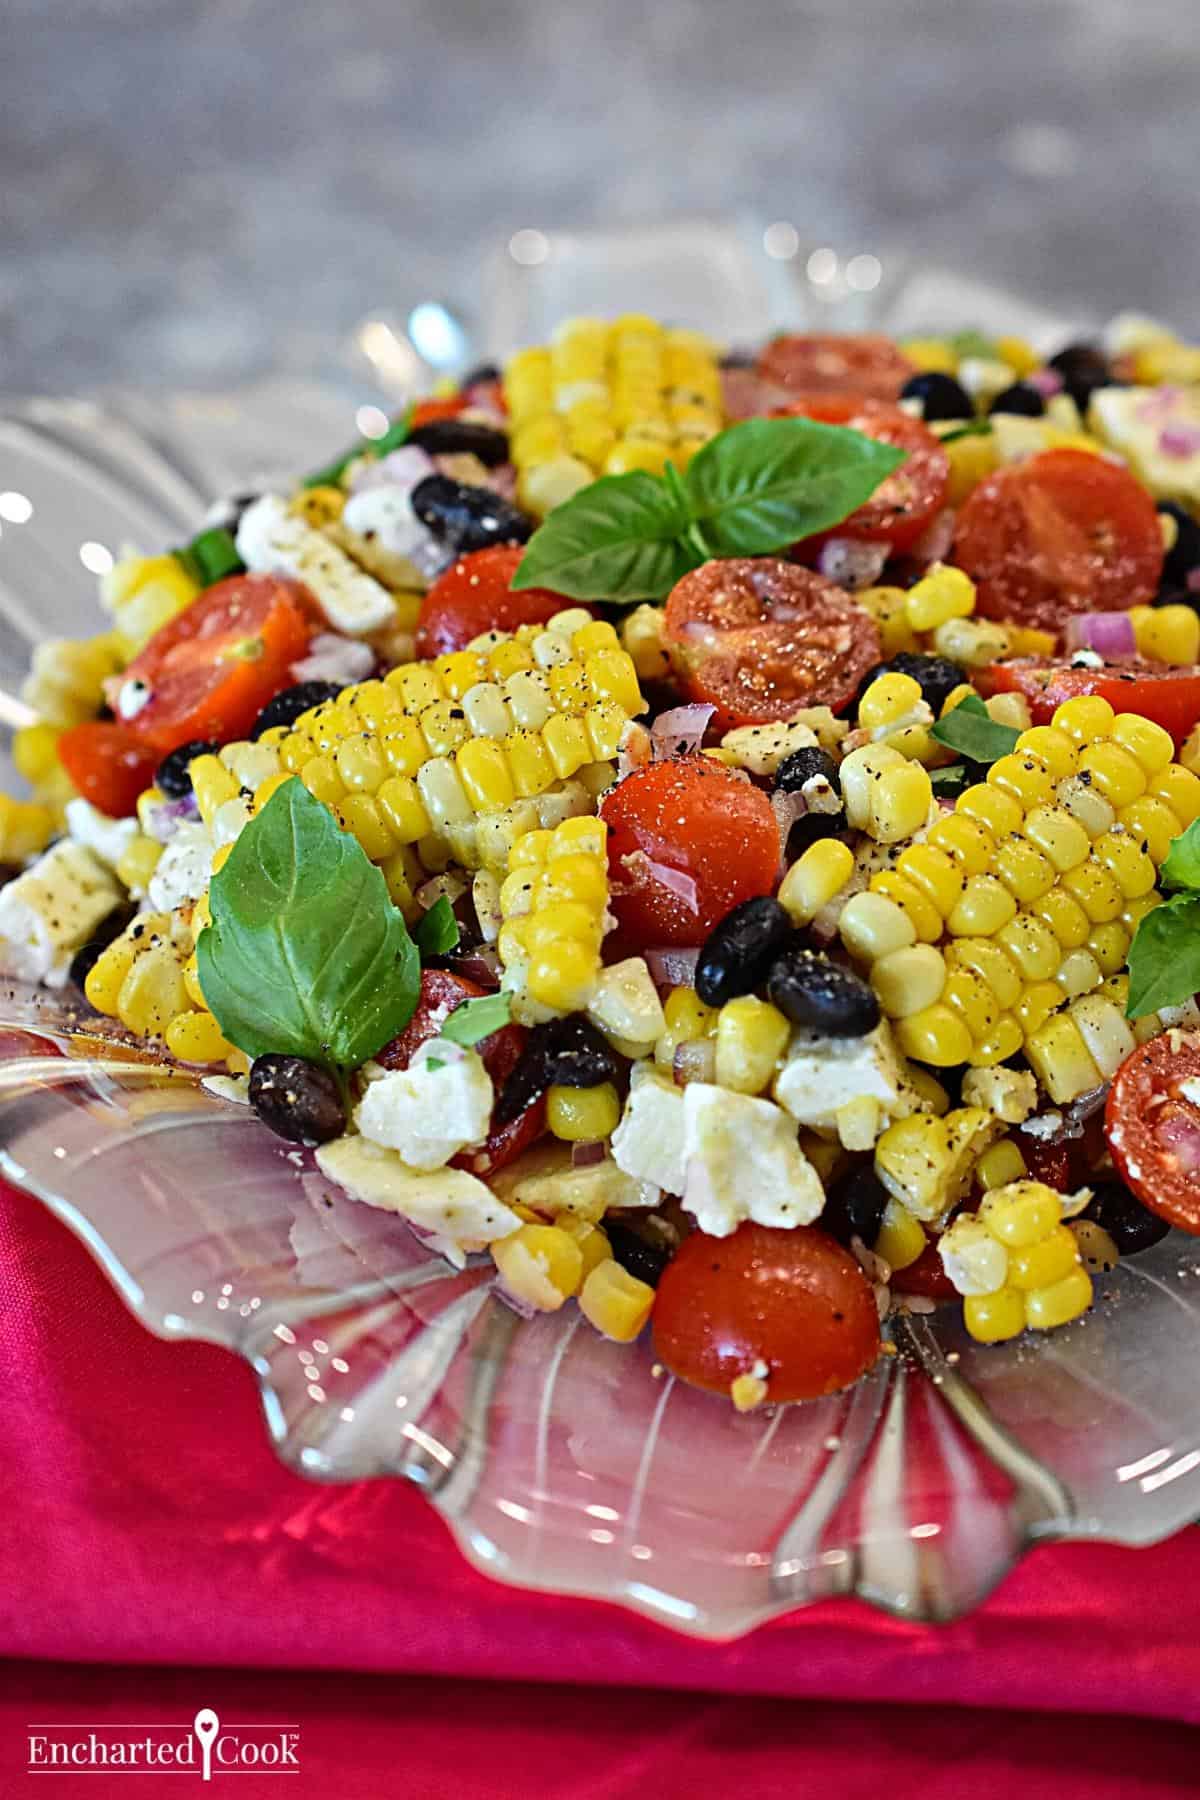 Corn salad on a glass plate with a red napkin.